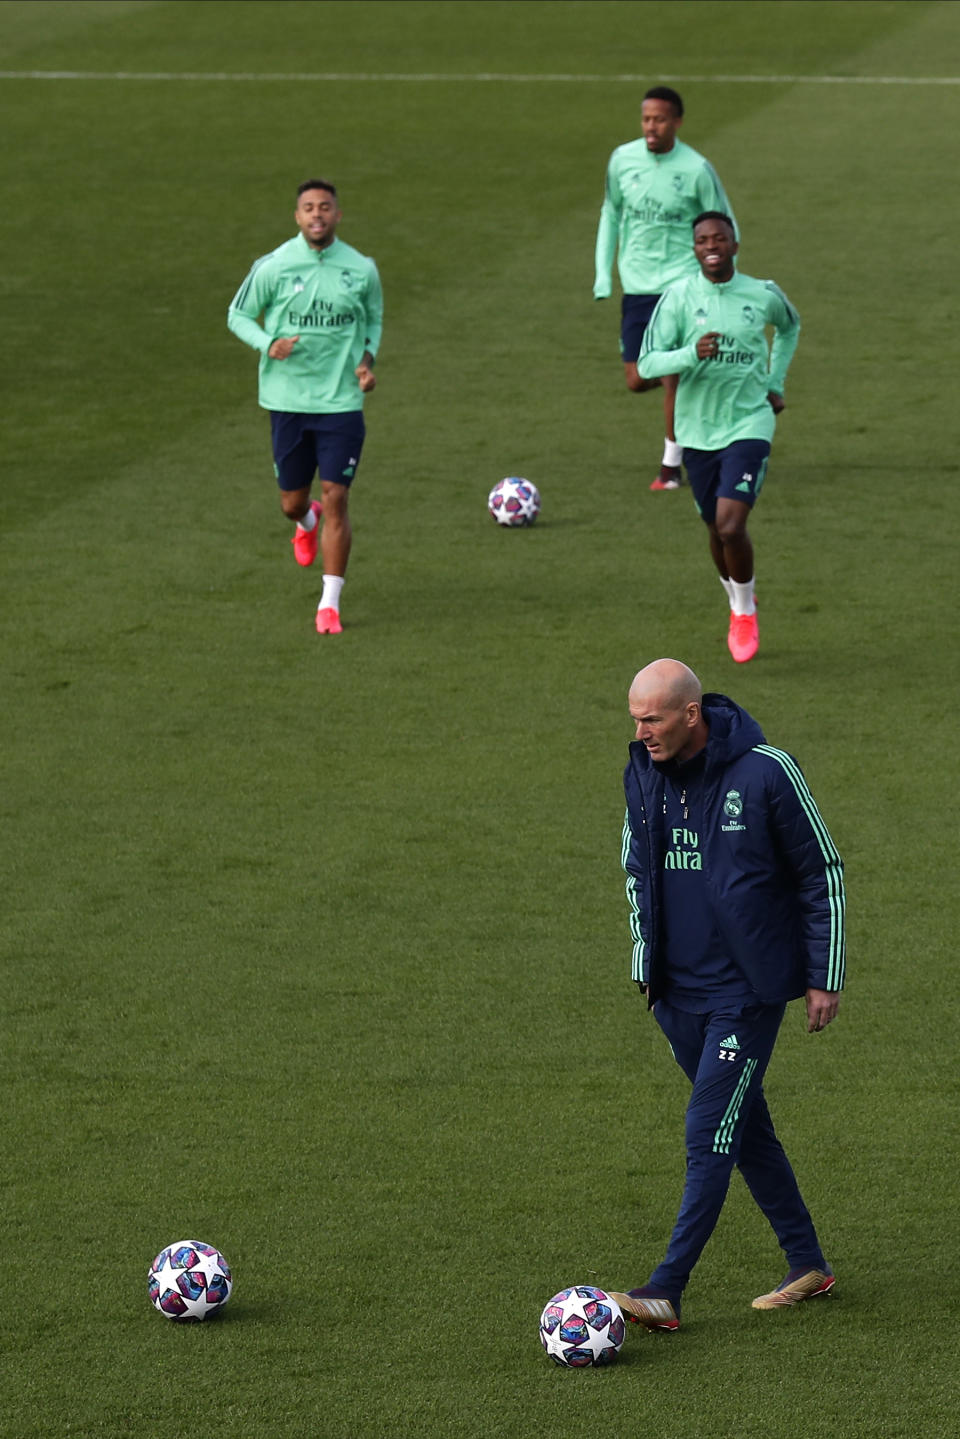 Real Madrid's head coach Zinedine Zidane attends a training session at the team's Valdebebas training ground in Madrid, Spain, Tuesday, Feb. 25, 2020. Real Madrid will play against Manchester City in a Champions League soccer match on Wednesday. (AP Photo/Manu Fernandez)